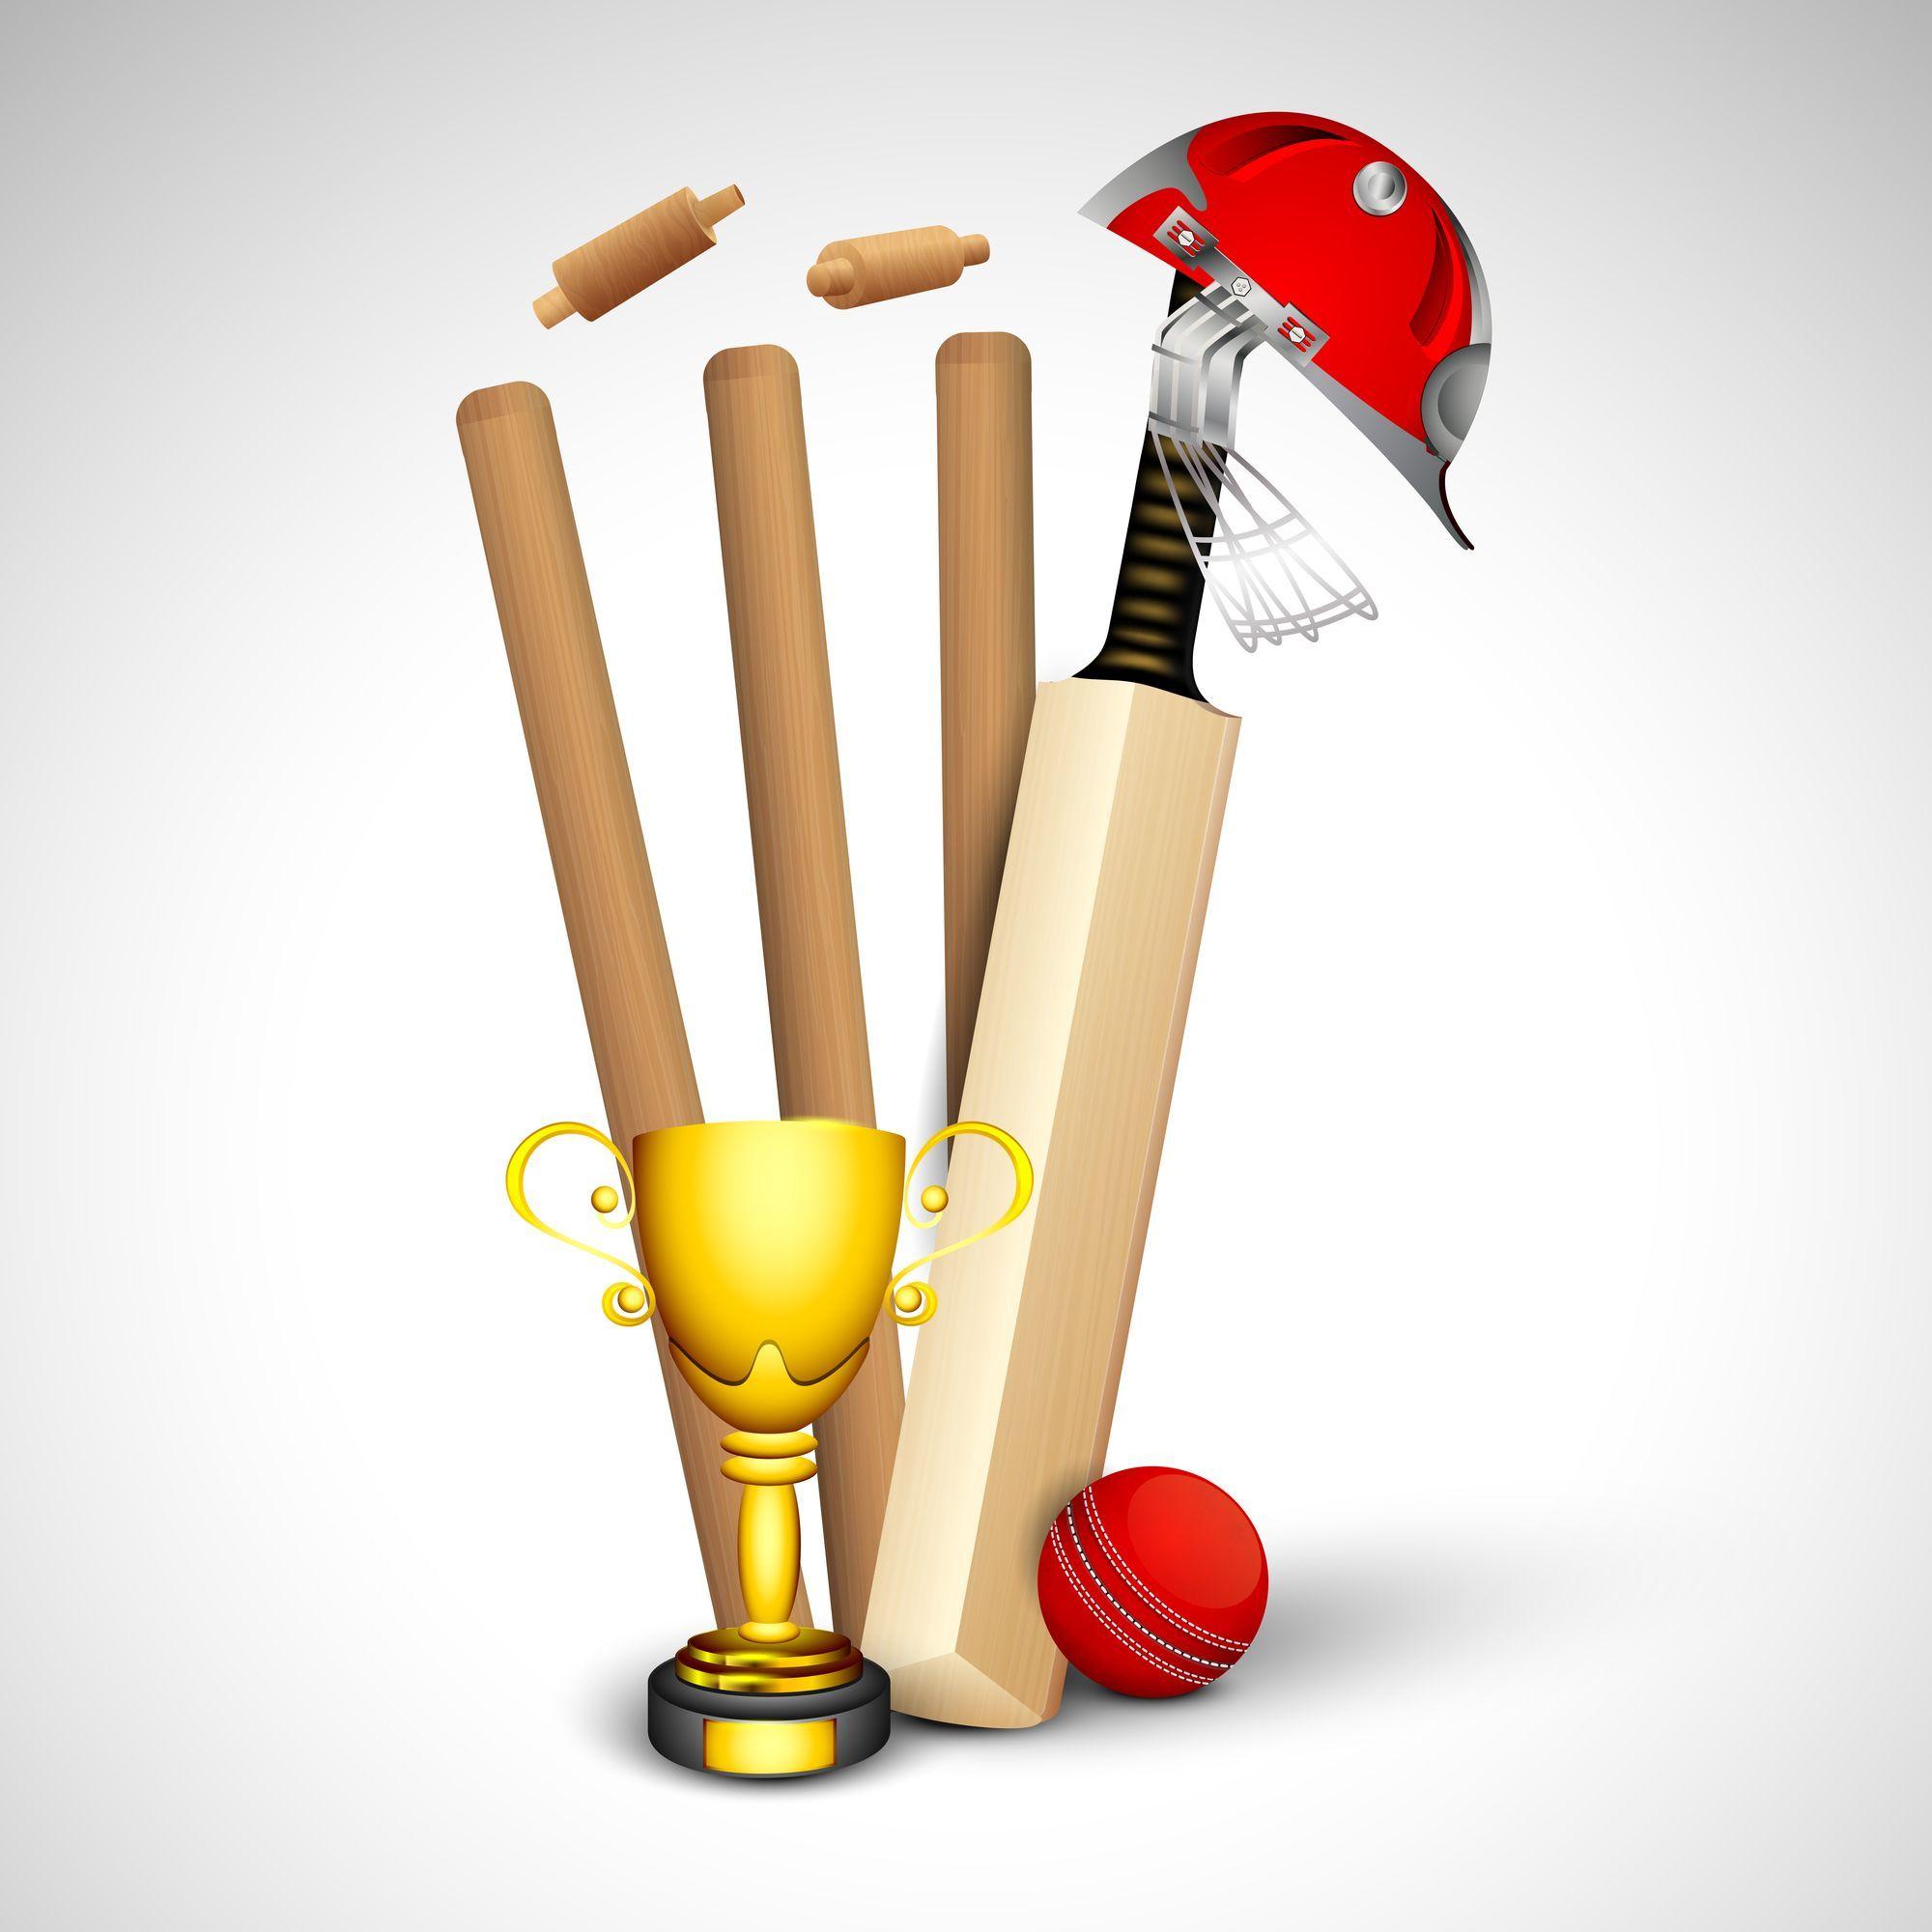 Ball Bat Logo - Abstract sports concept with cricket ball on wicket stumps ...